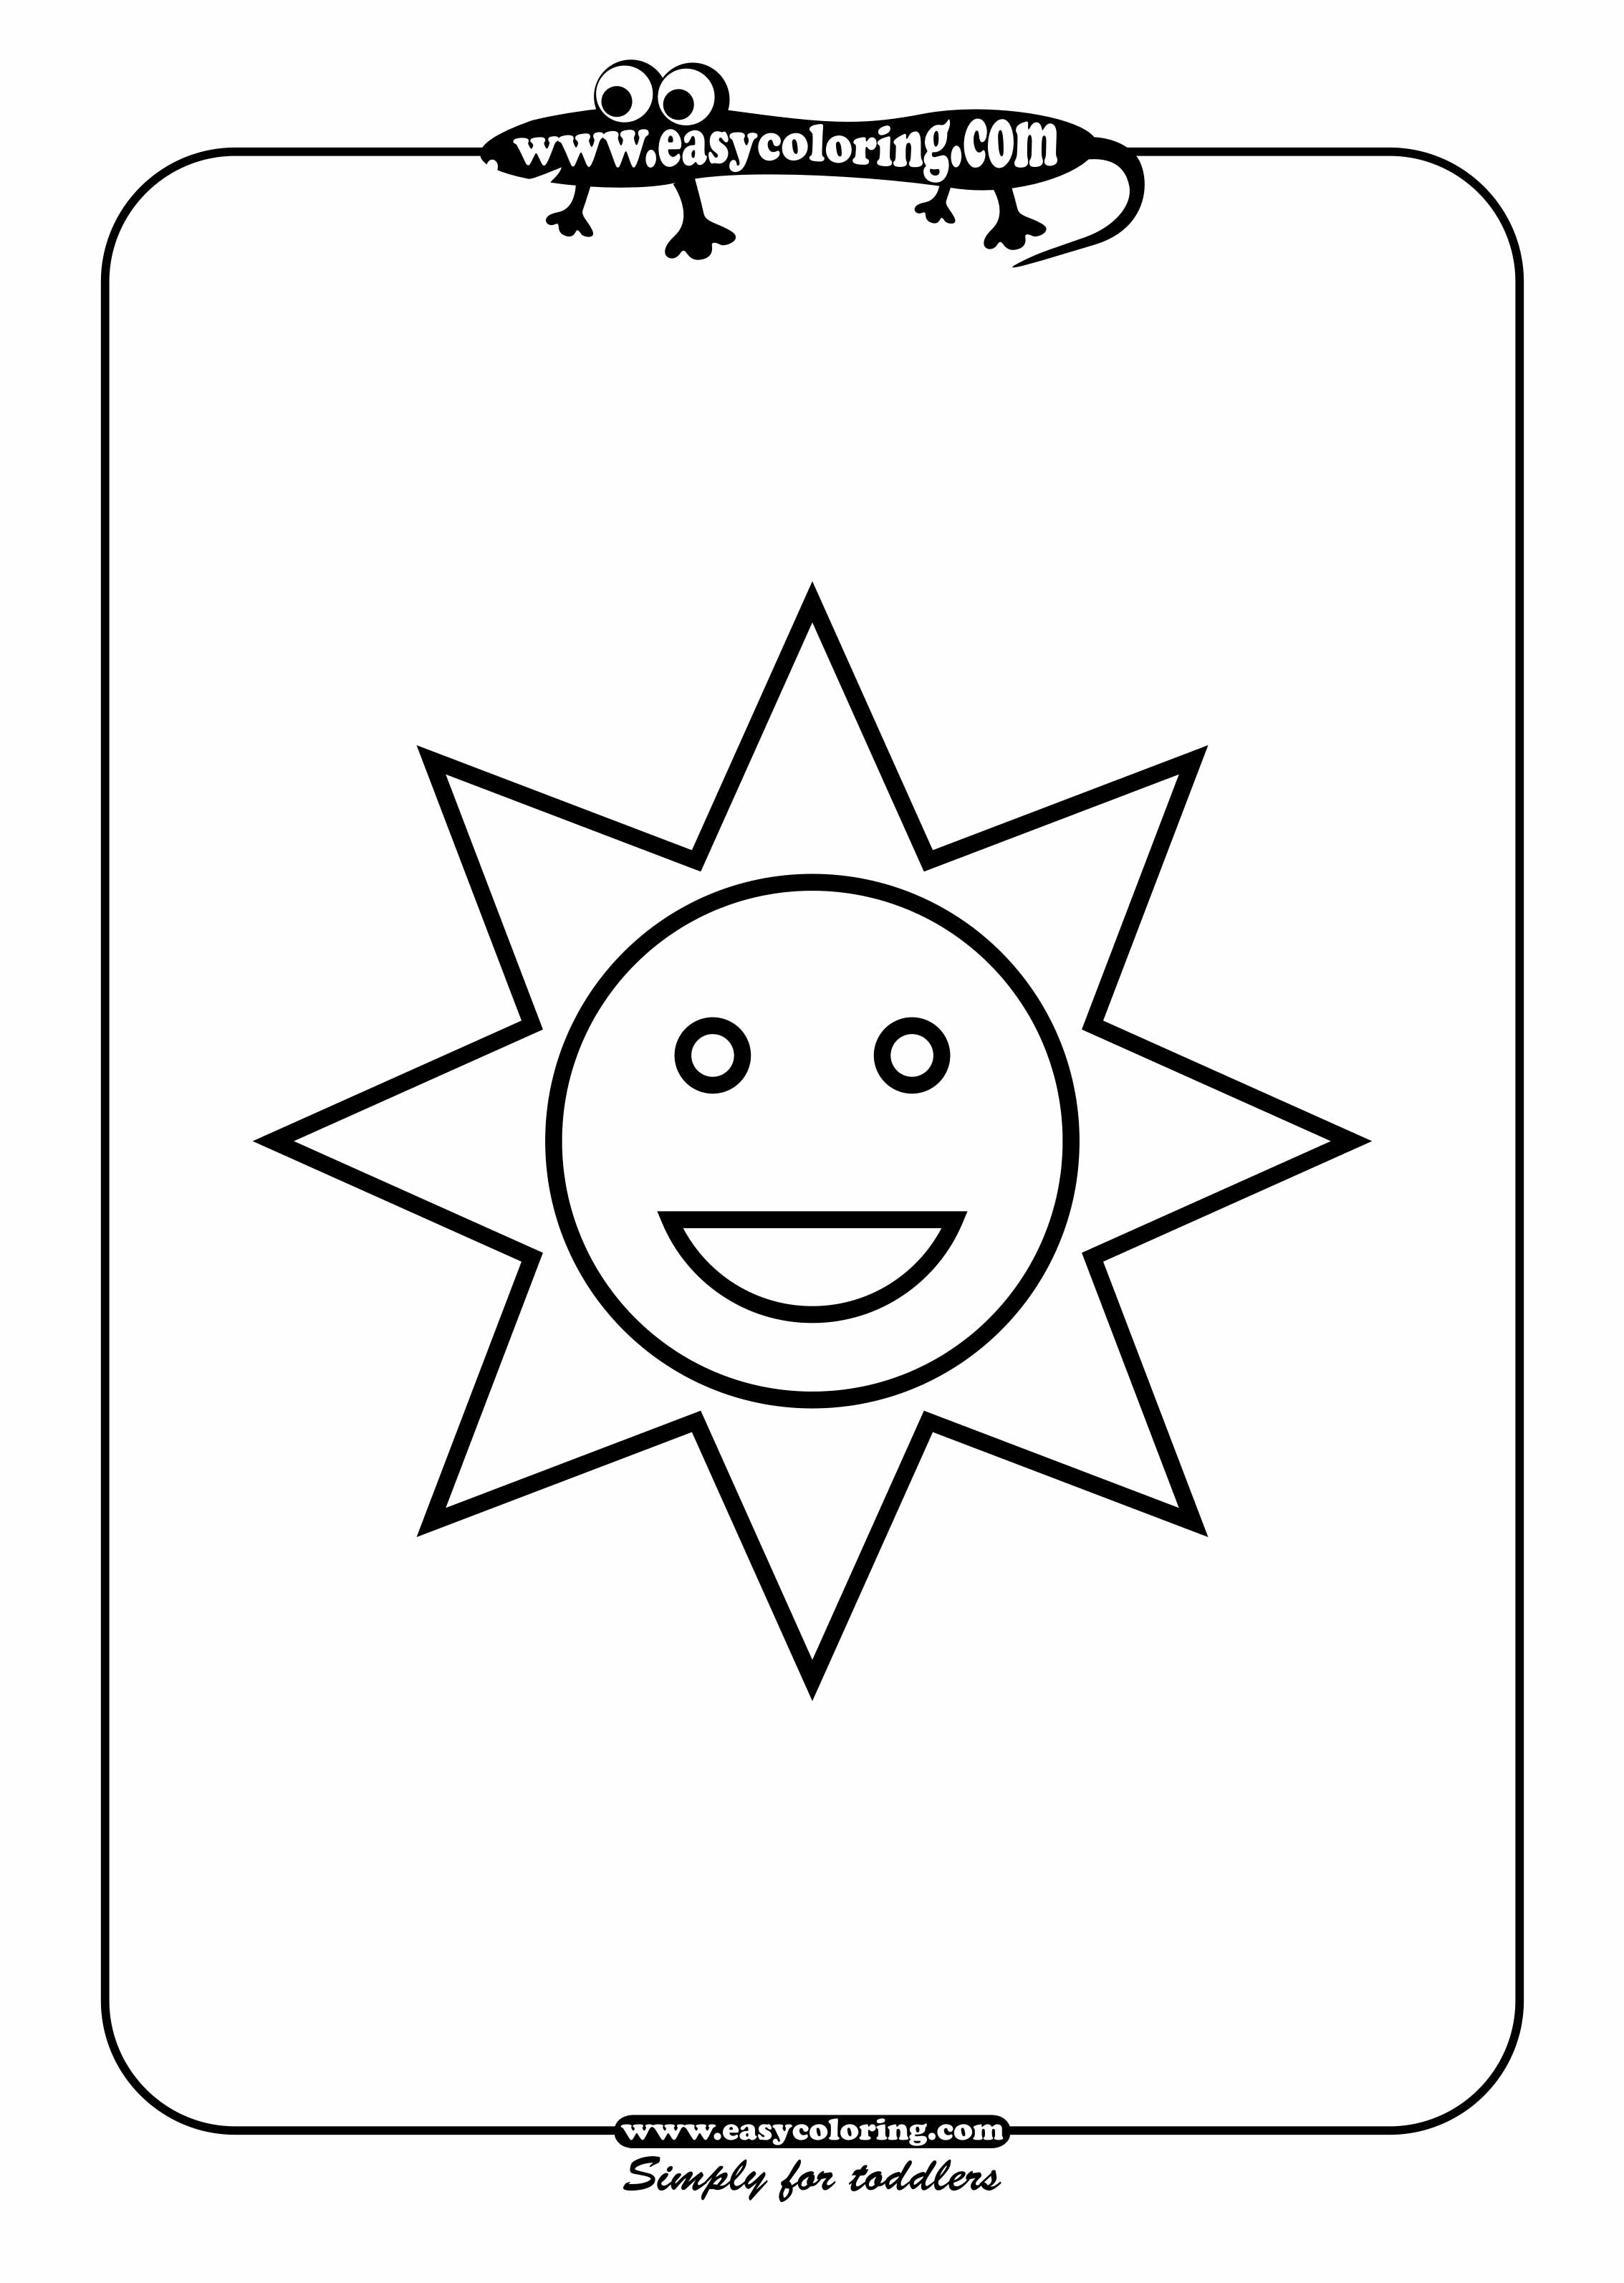 sun simple shapes easy coloring pages for toddlers